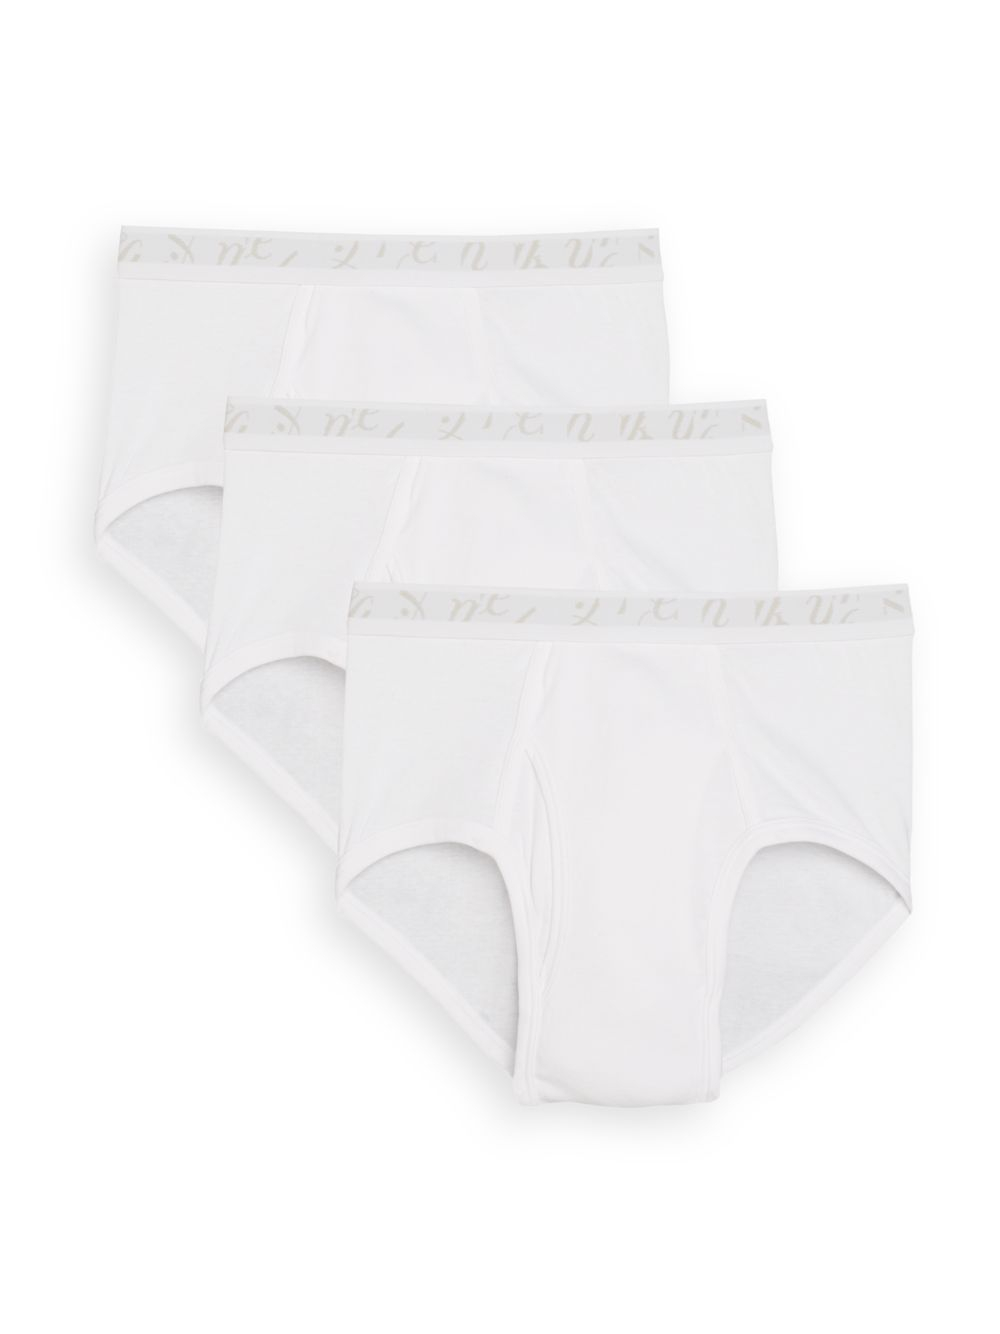 Lyst - Saks Fifth Avenue Supima Cotton Briefs, 3-pack in White for Men